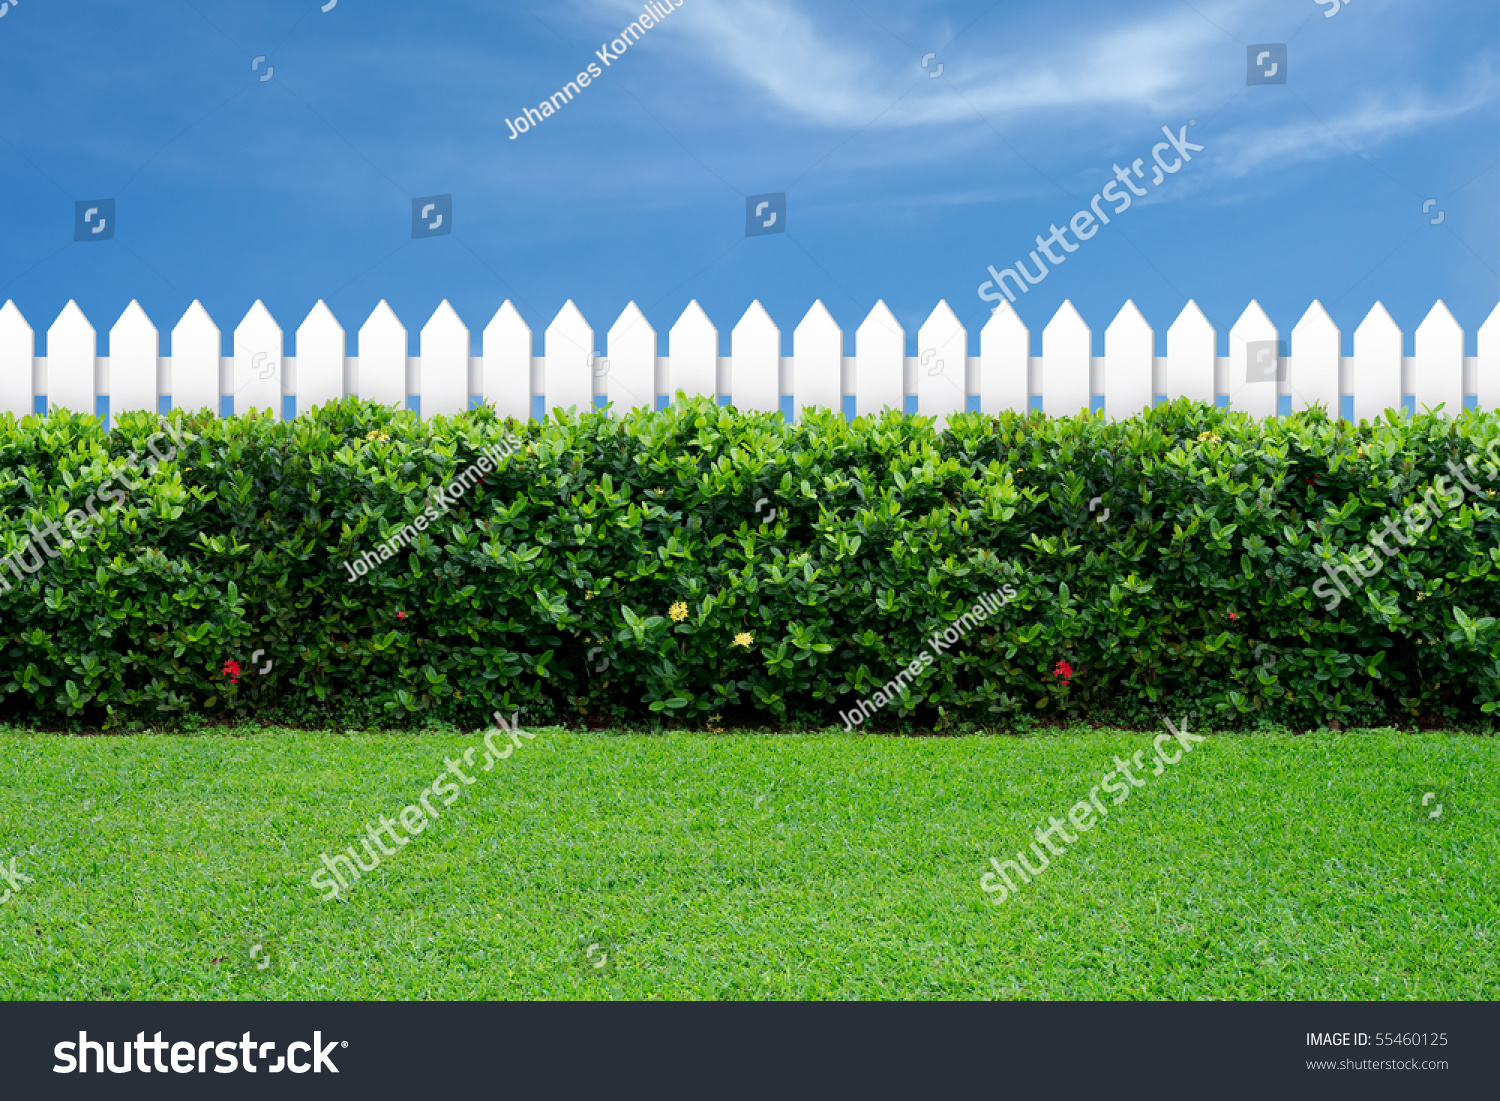 White fence and green grass on blue sky. #55460125